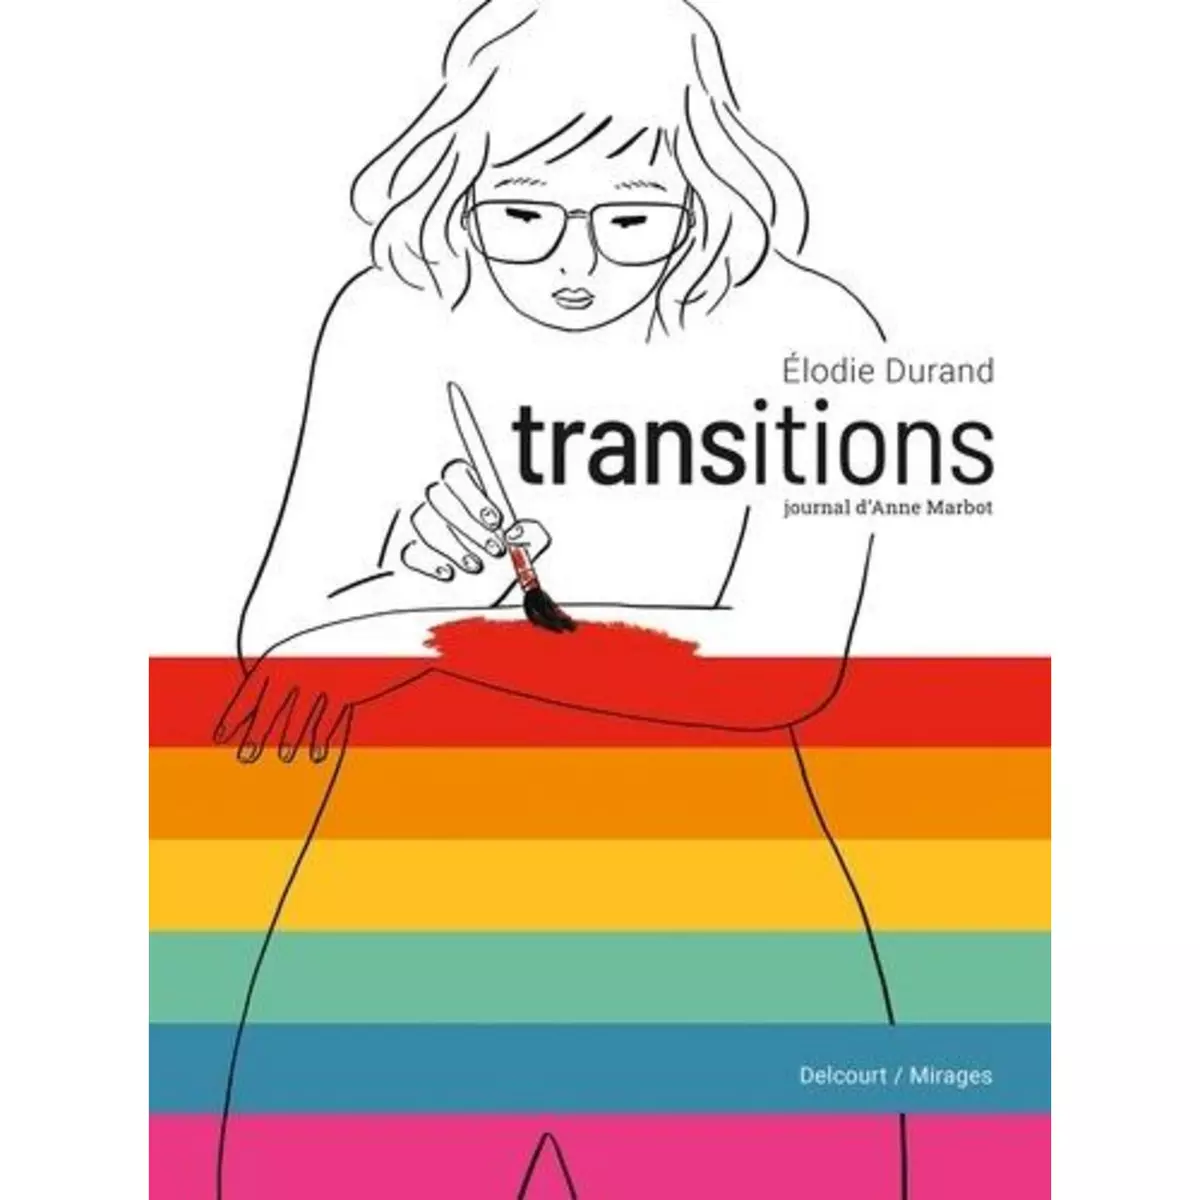  TRANSITIONS. JOURNAL D'ANNE MARBOT, Durand Elodie